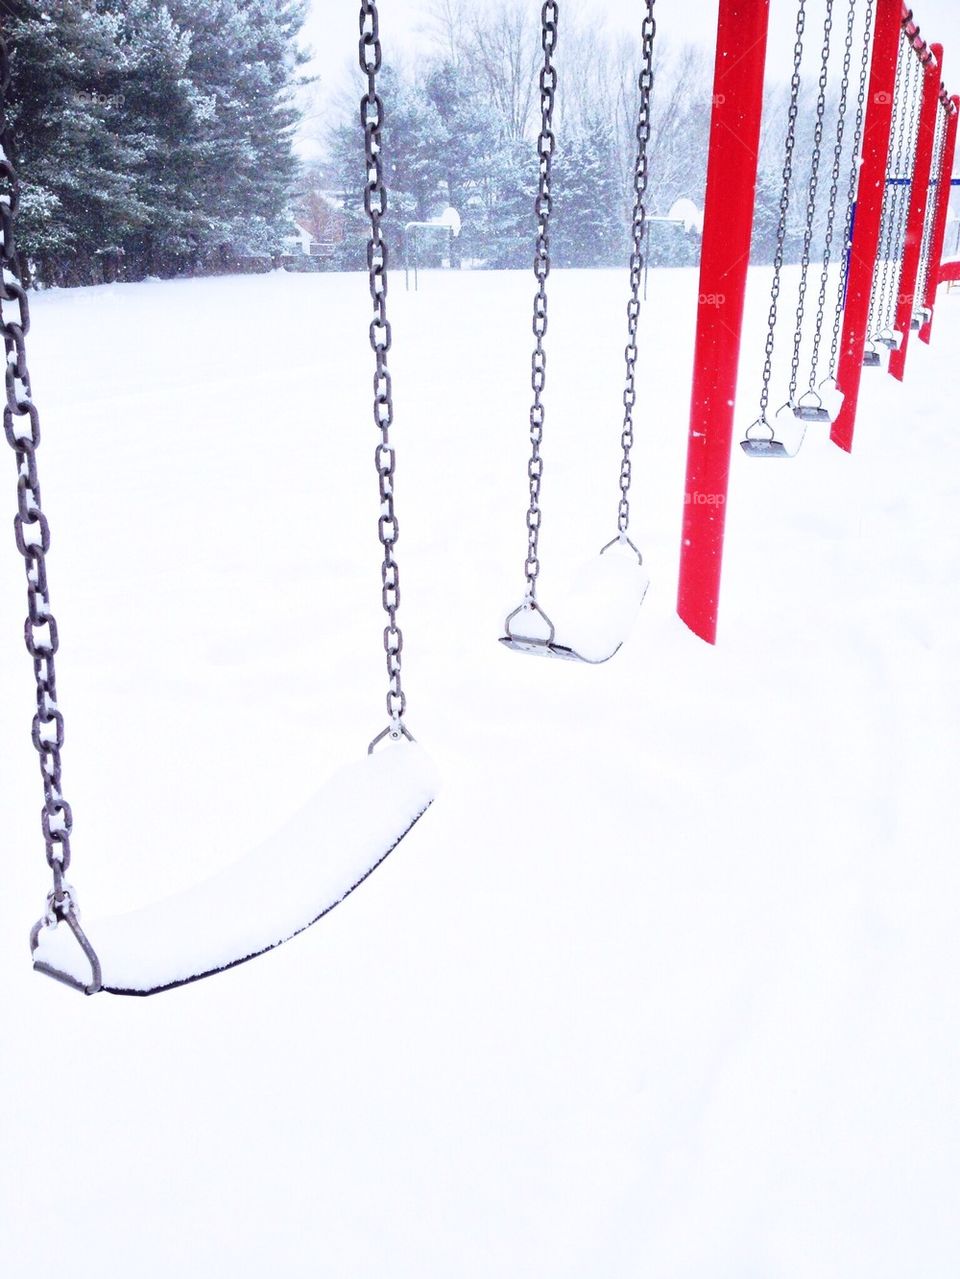 Playground in the Snow